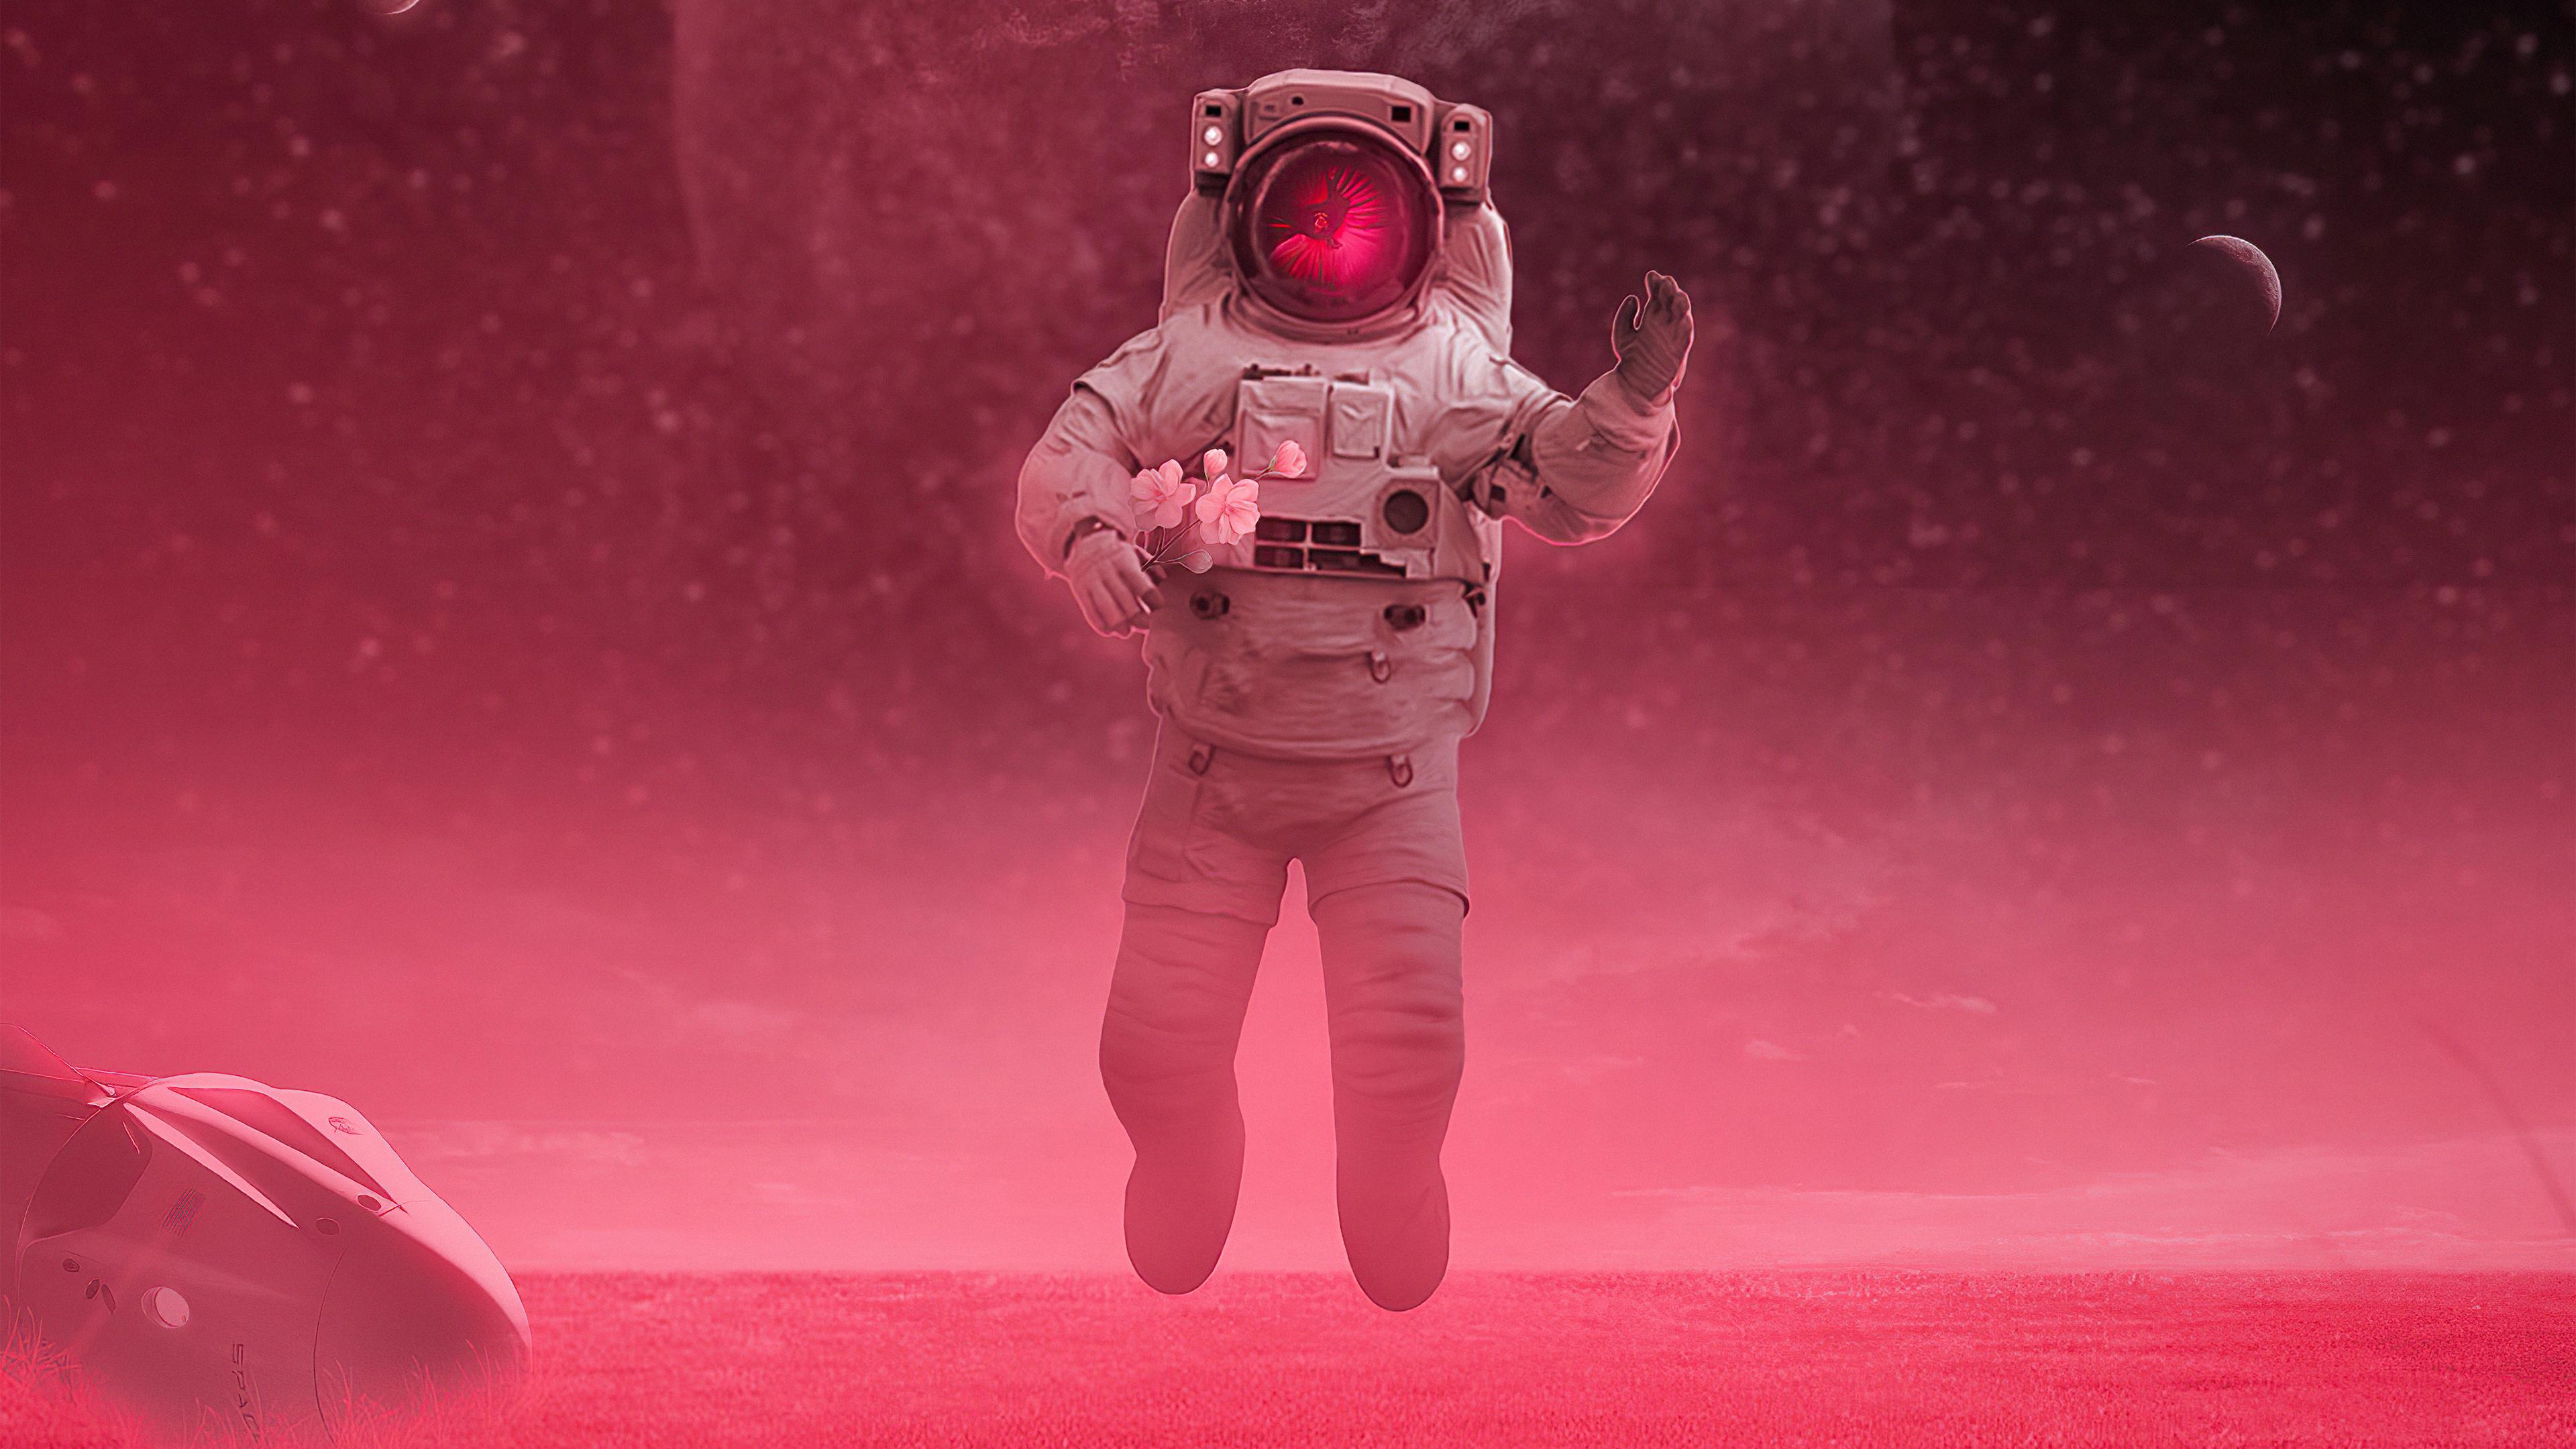 Astronaut Floating In Space Wallpapers Top Free Astronaut Floating In Space Backgrounds 4909